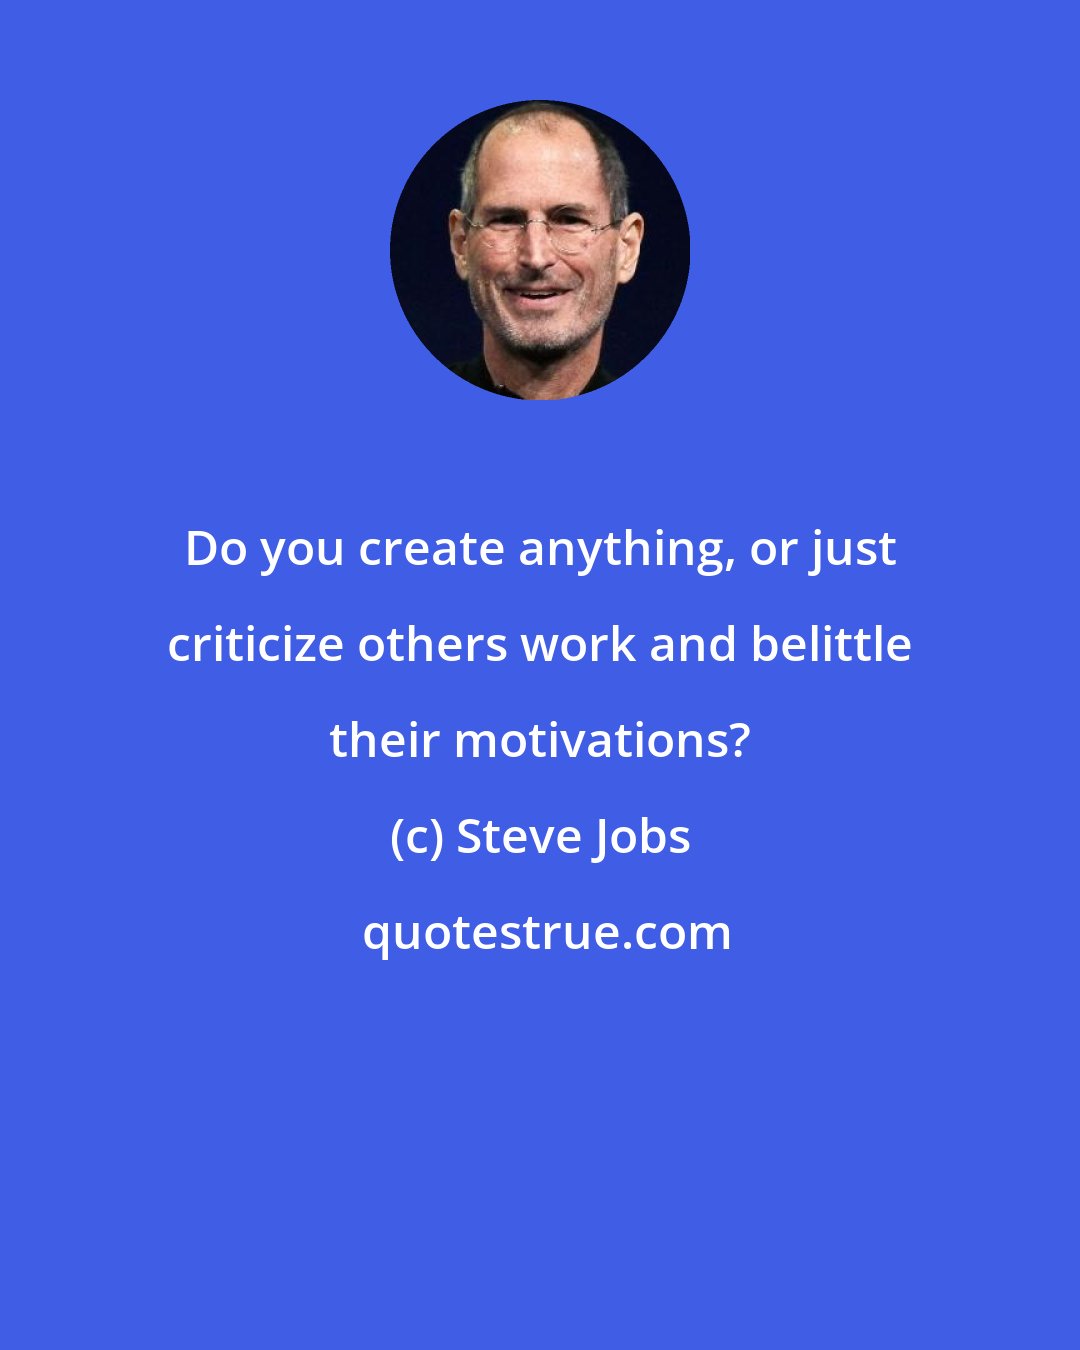 Steve Jobs: Do you create anything, or just criticize others work and belittle their motivations?